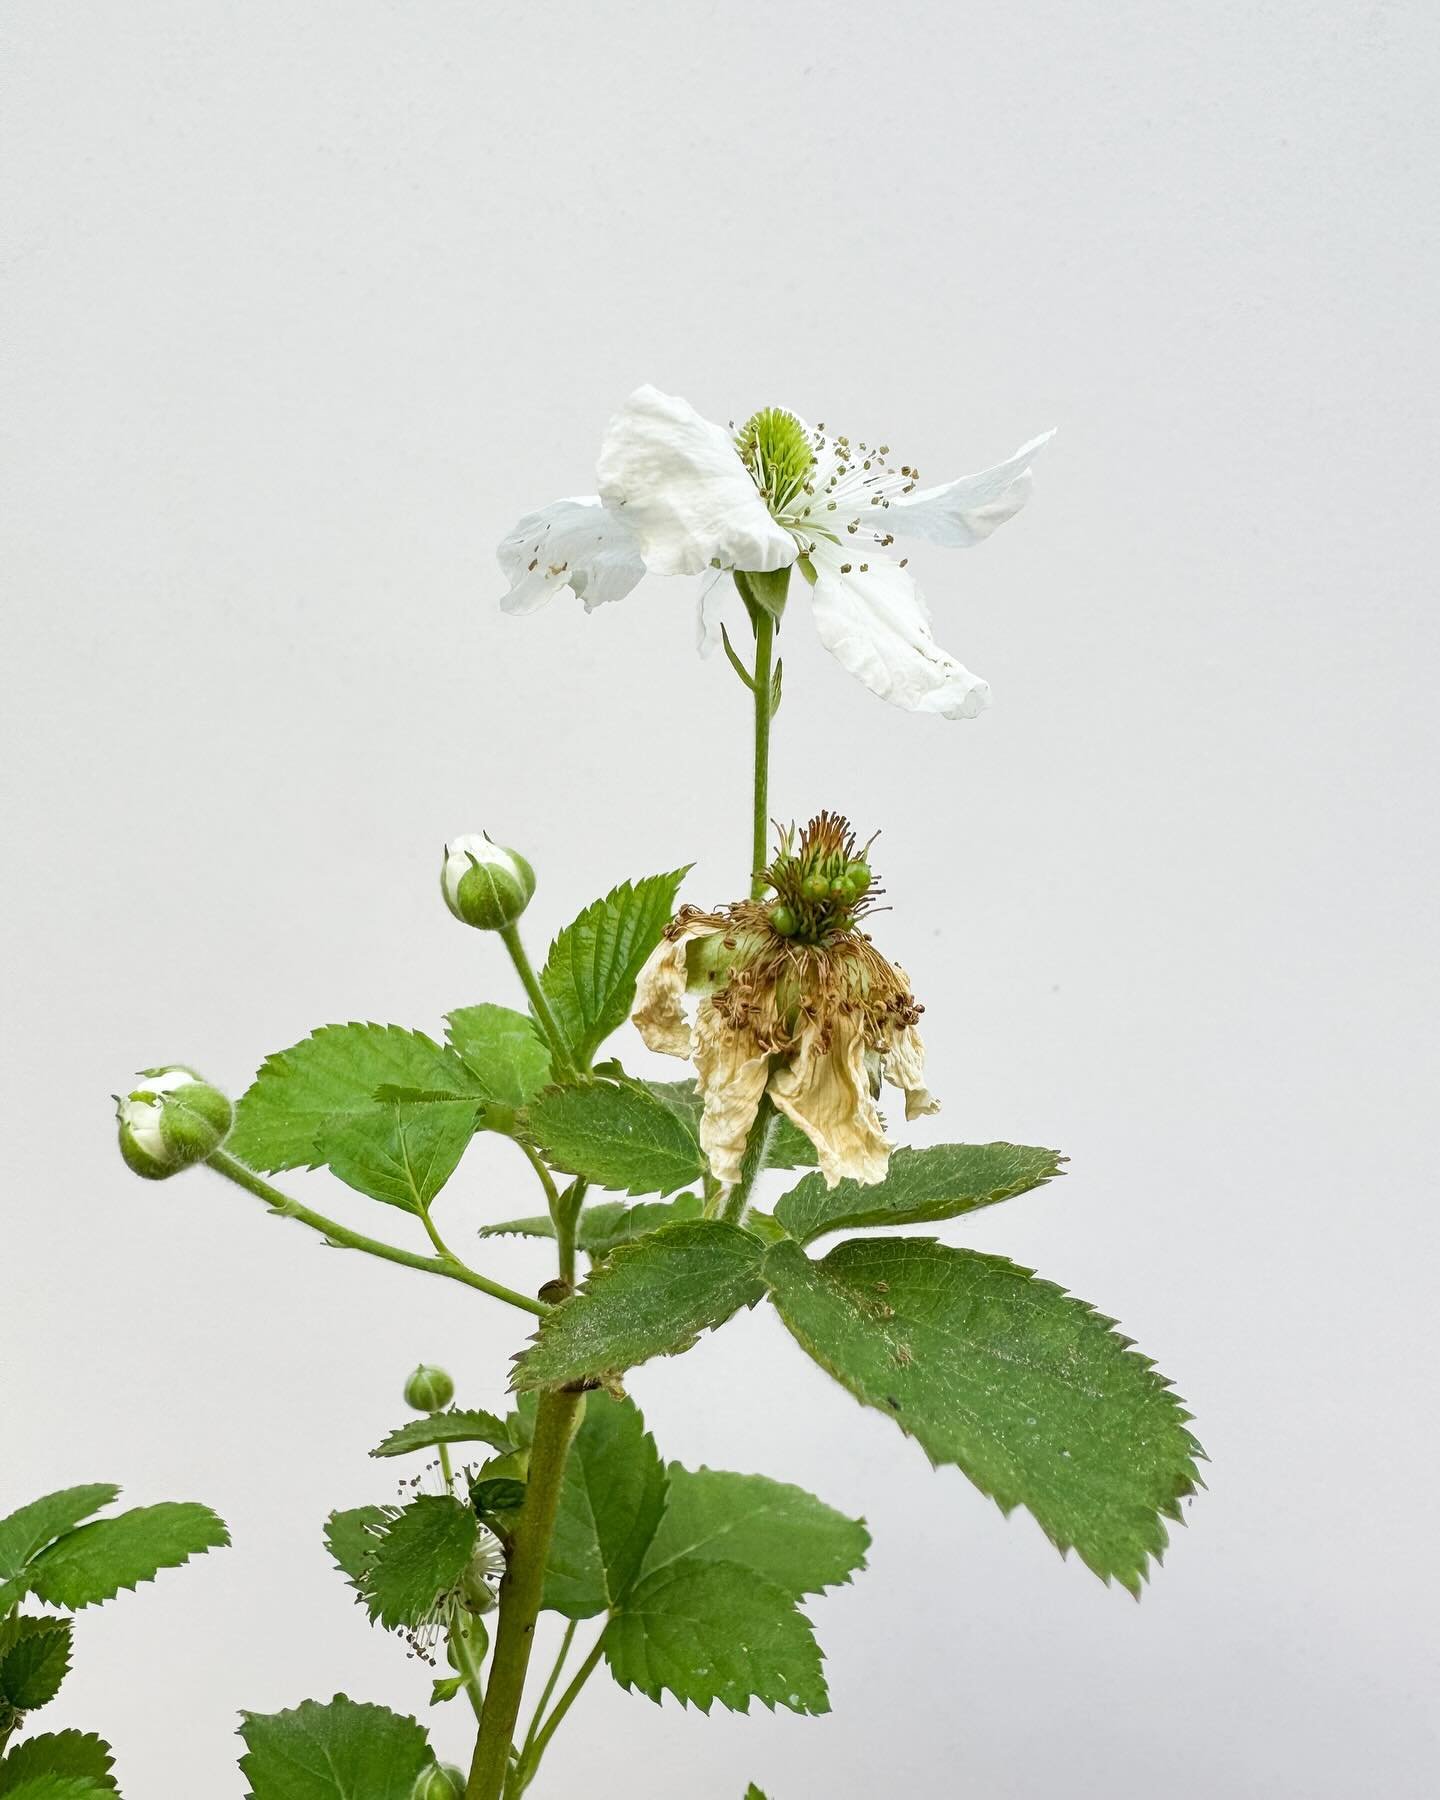 The little blackberry flowers on a Good Day can bring me so much joy.  So I bought a blackberry bush and am soooo very excited to watch it bloom. See what's coming out of that wilting flower?! That blackberry is most definitely going to garnish a Goo